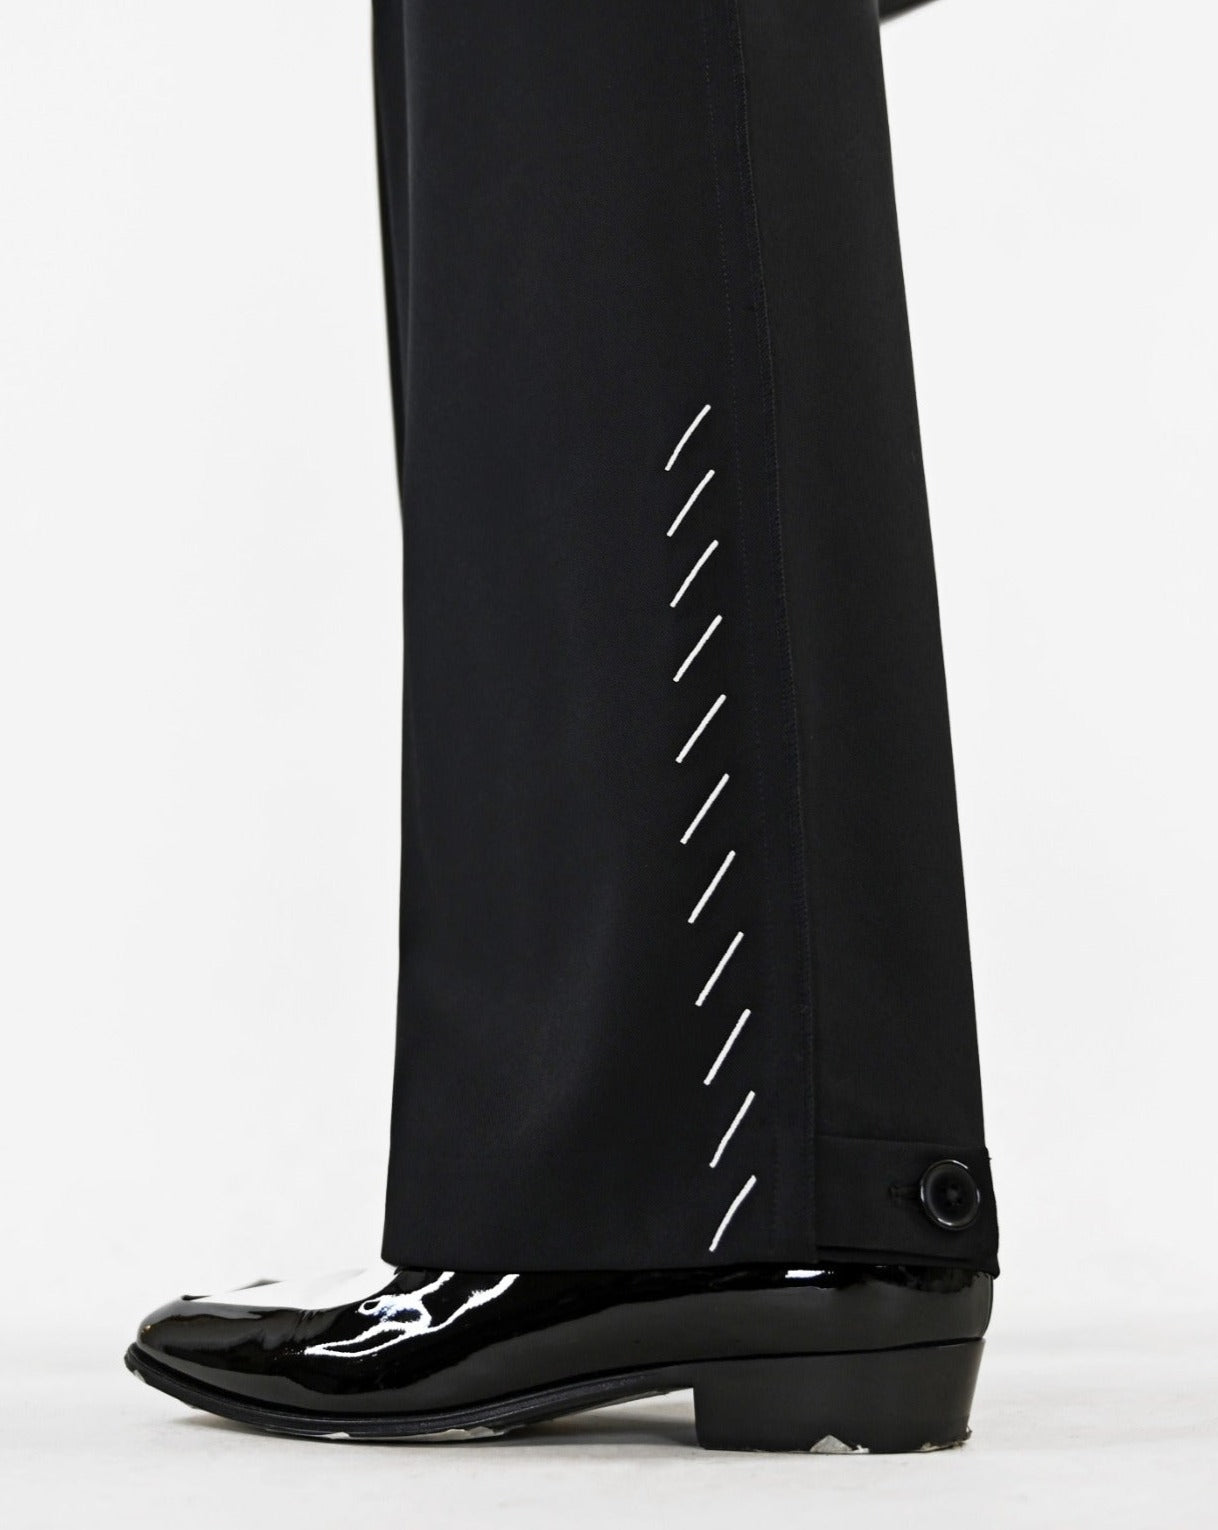 aalis KIRK embroidered suiting pants (Black)